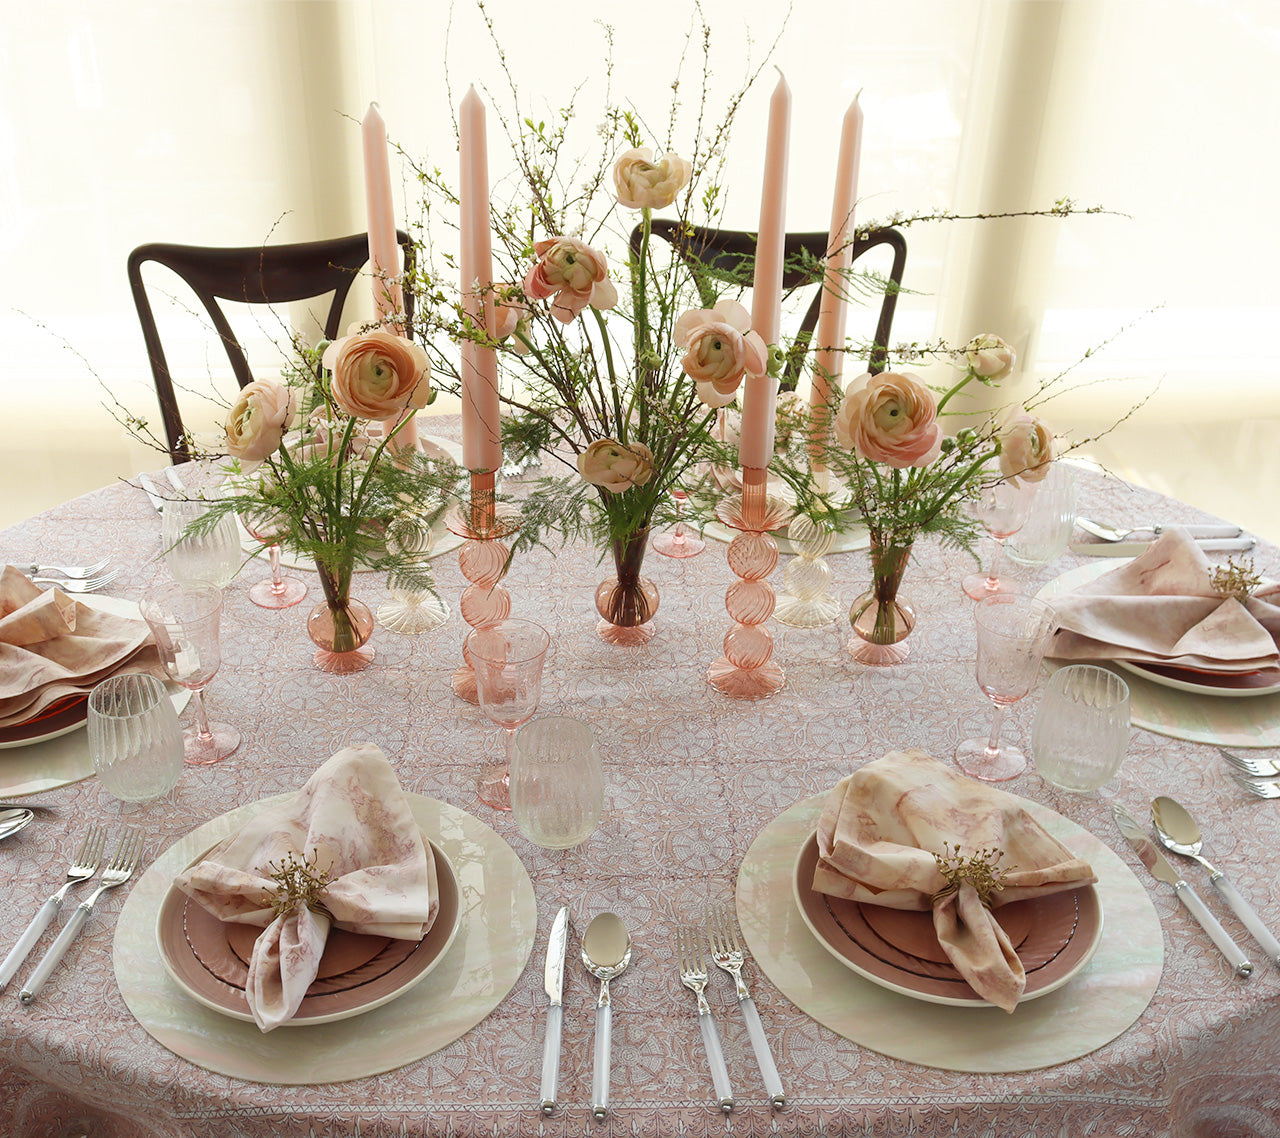 Table with pink place settings and a center filled with Bella Candlesticks and Tess Bud Vases in blush